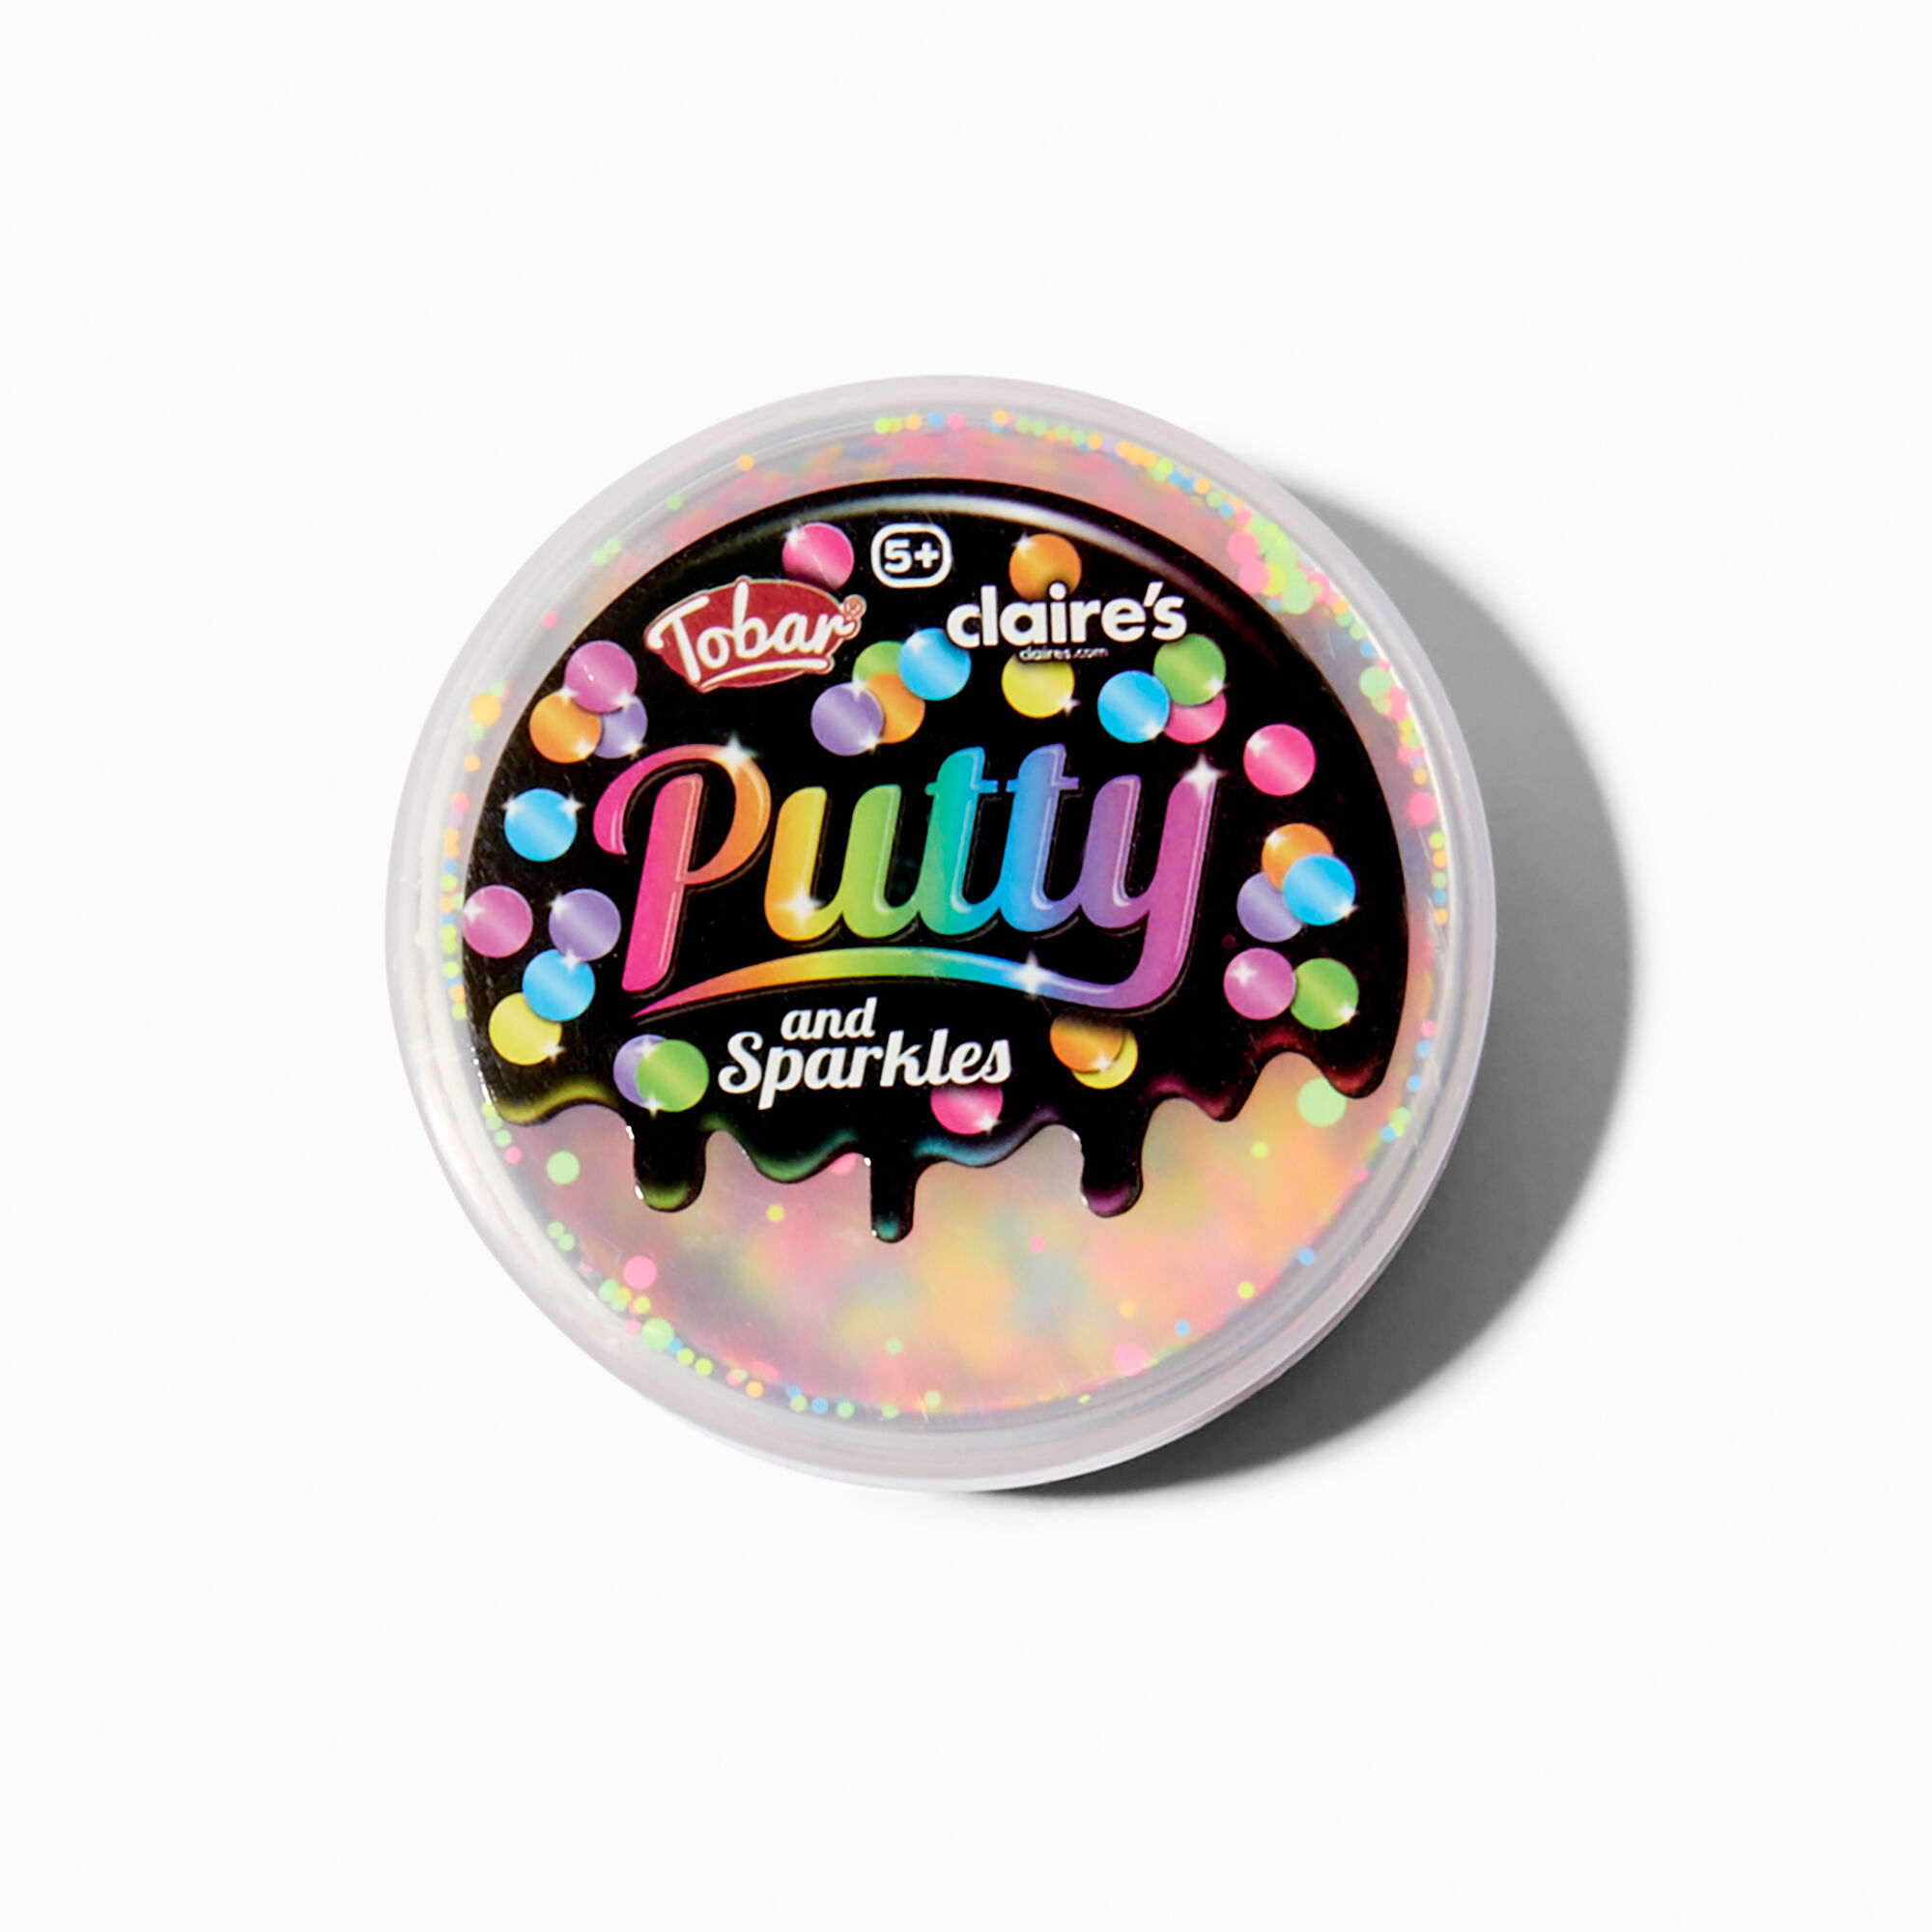 View Claires Tobar Putty And Sparkles information